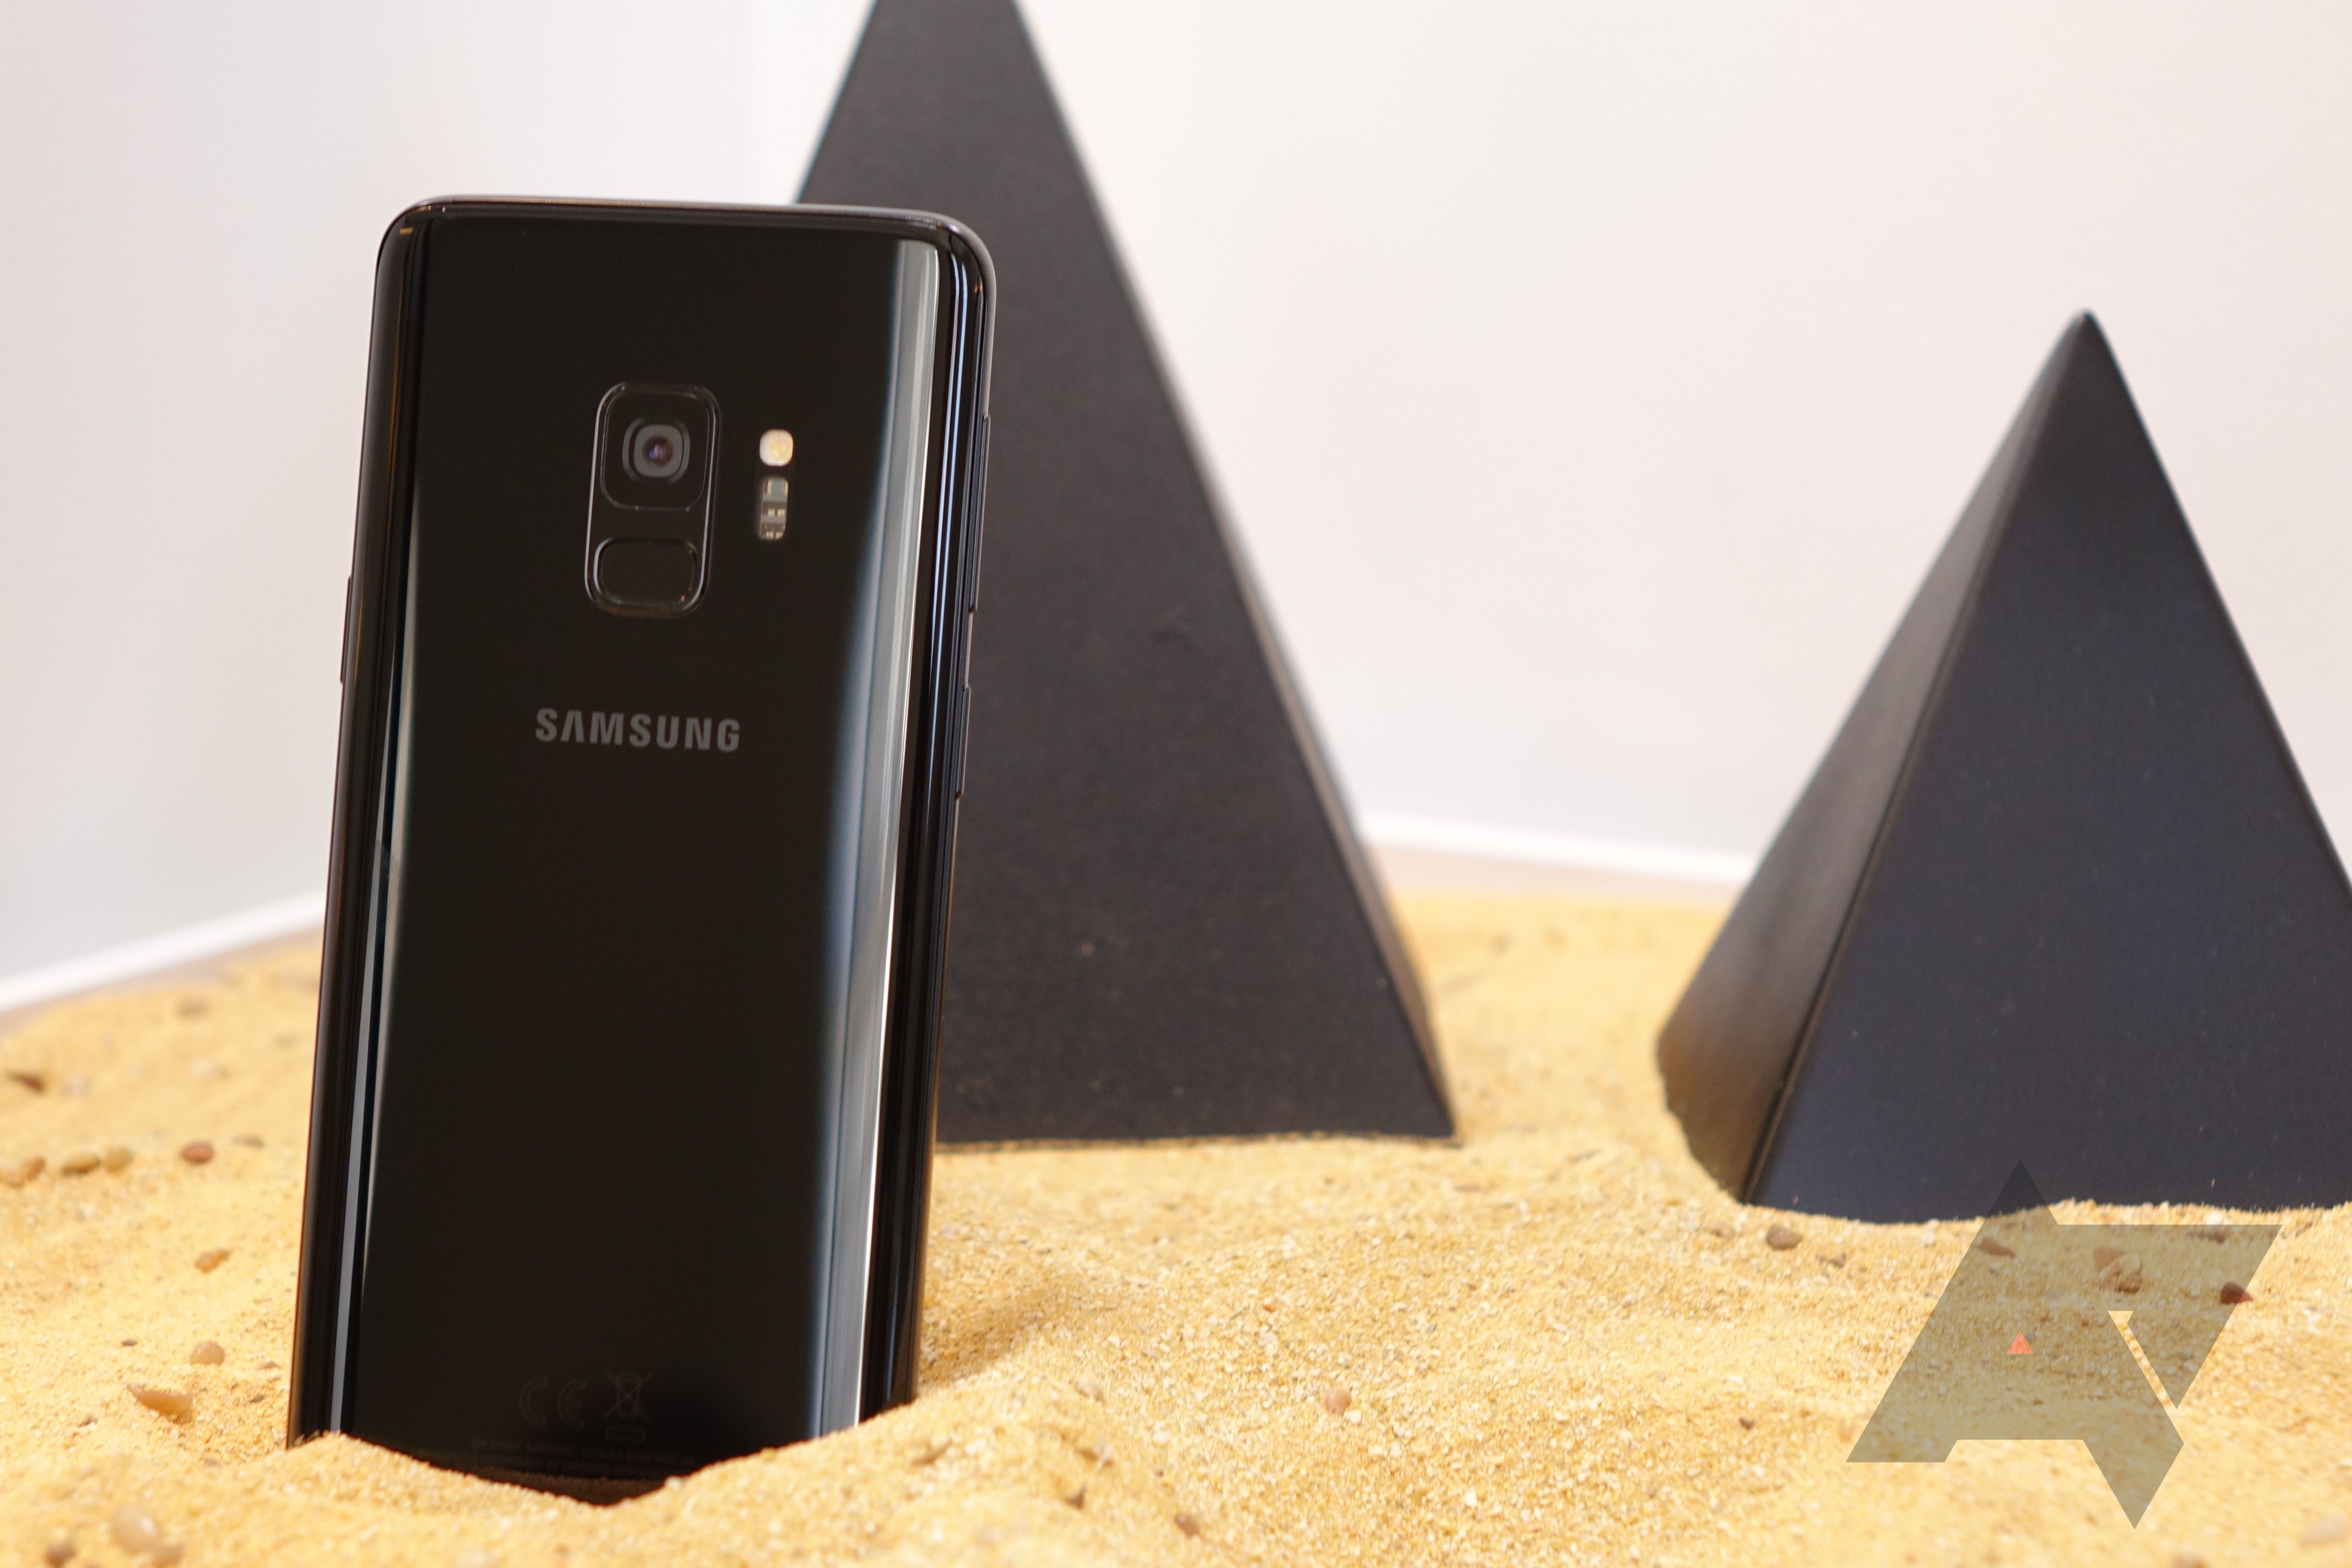 Update T Mobile S Pr Was Misleading Samsung Galaxy S9 And S9 Among First Phones To Support Band 71 Lte